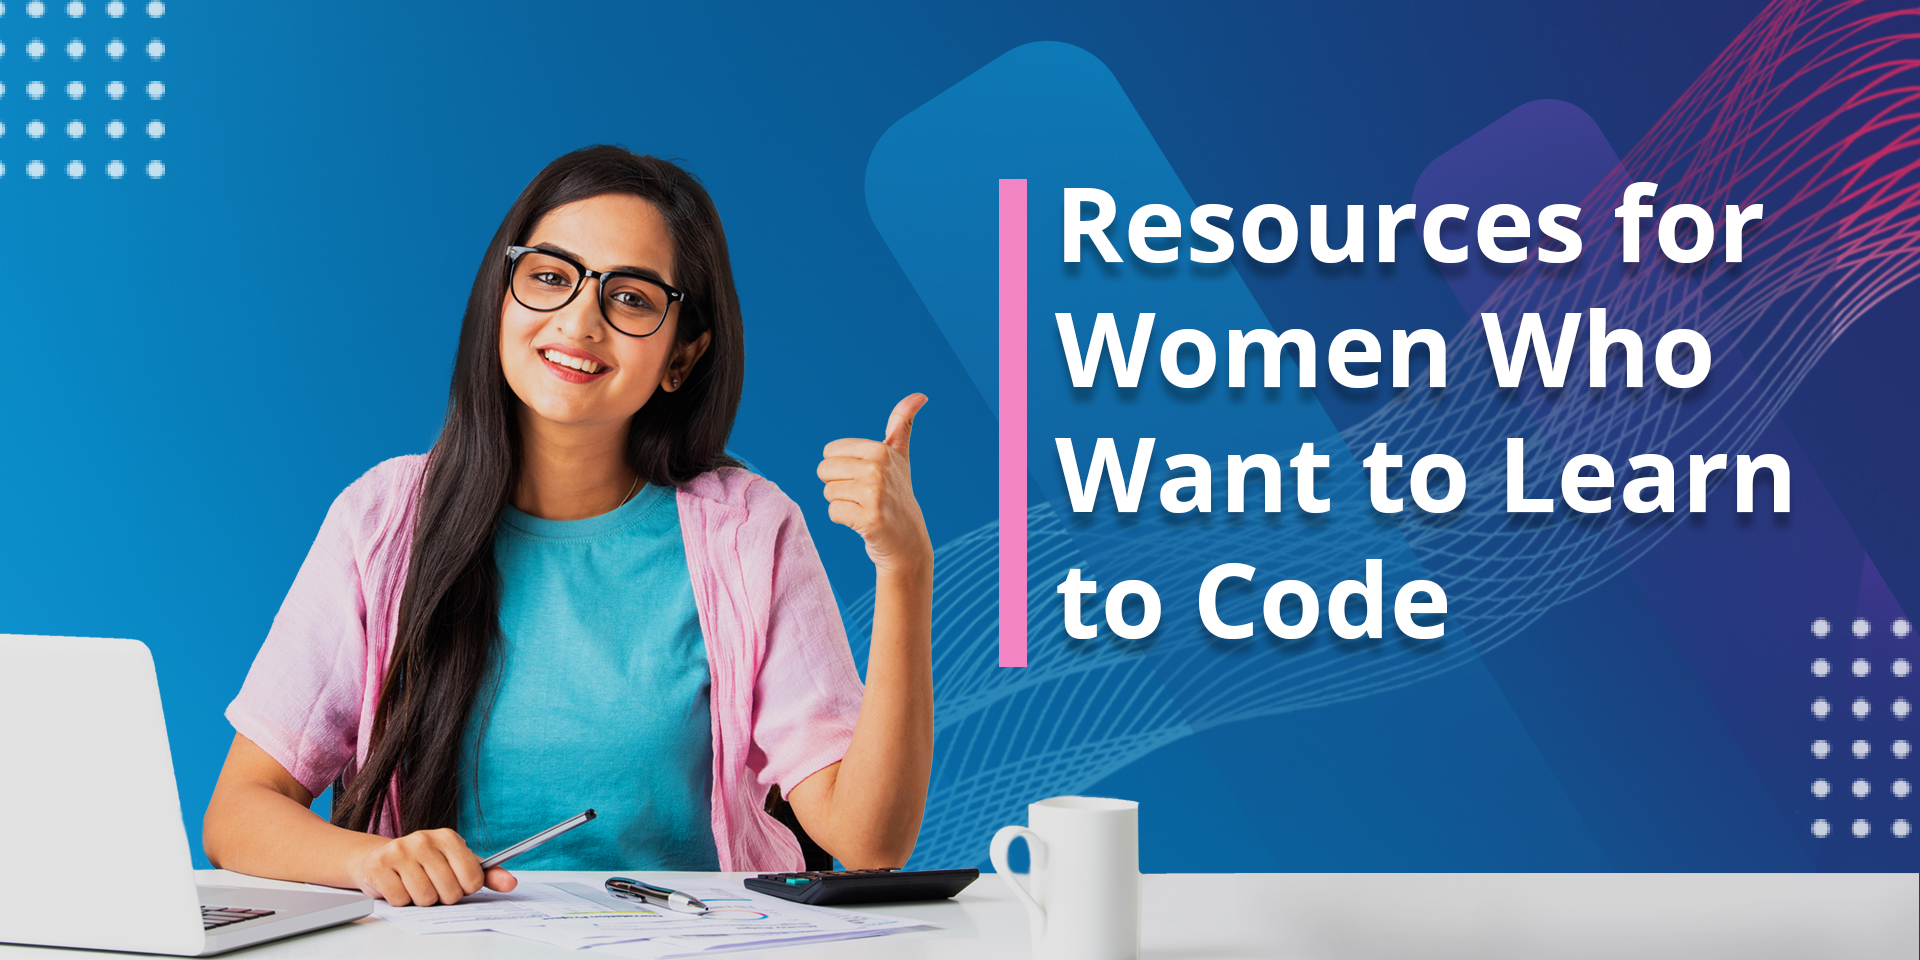 Coding for Women – Top 5 Online Coding Resources to Learn How to Code